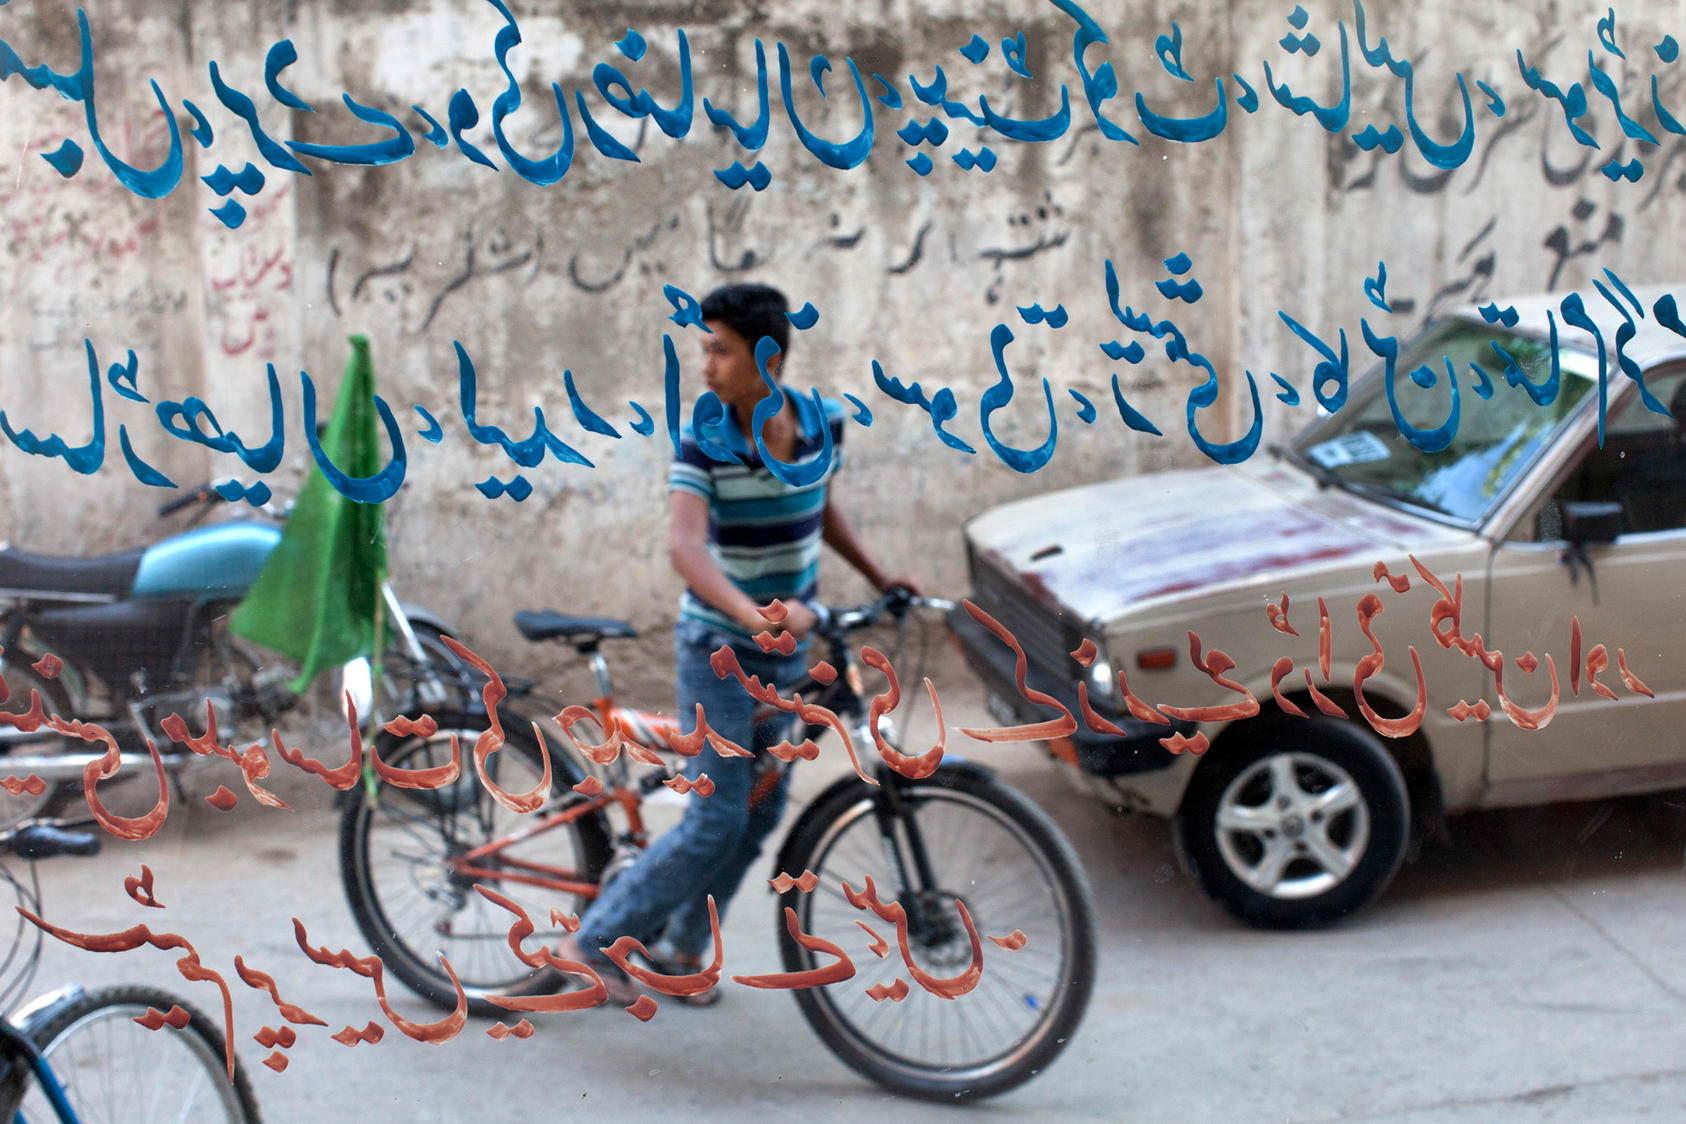 A youth displays his support for the Muslim League with a green flag on his bicycle, as seen through the window of a shop, in Rawalpindi, Pakistan, May 8, 2013. General elections in Pakistan are scheduled to be held on Saturday to elect a new parliament.